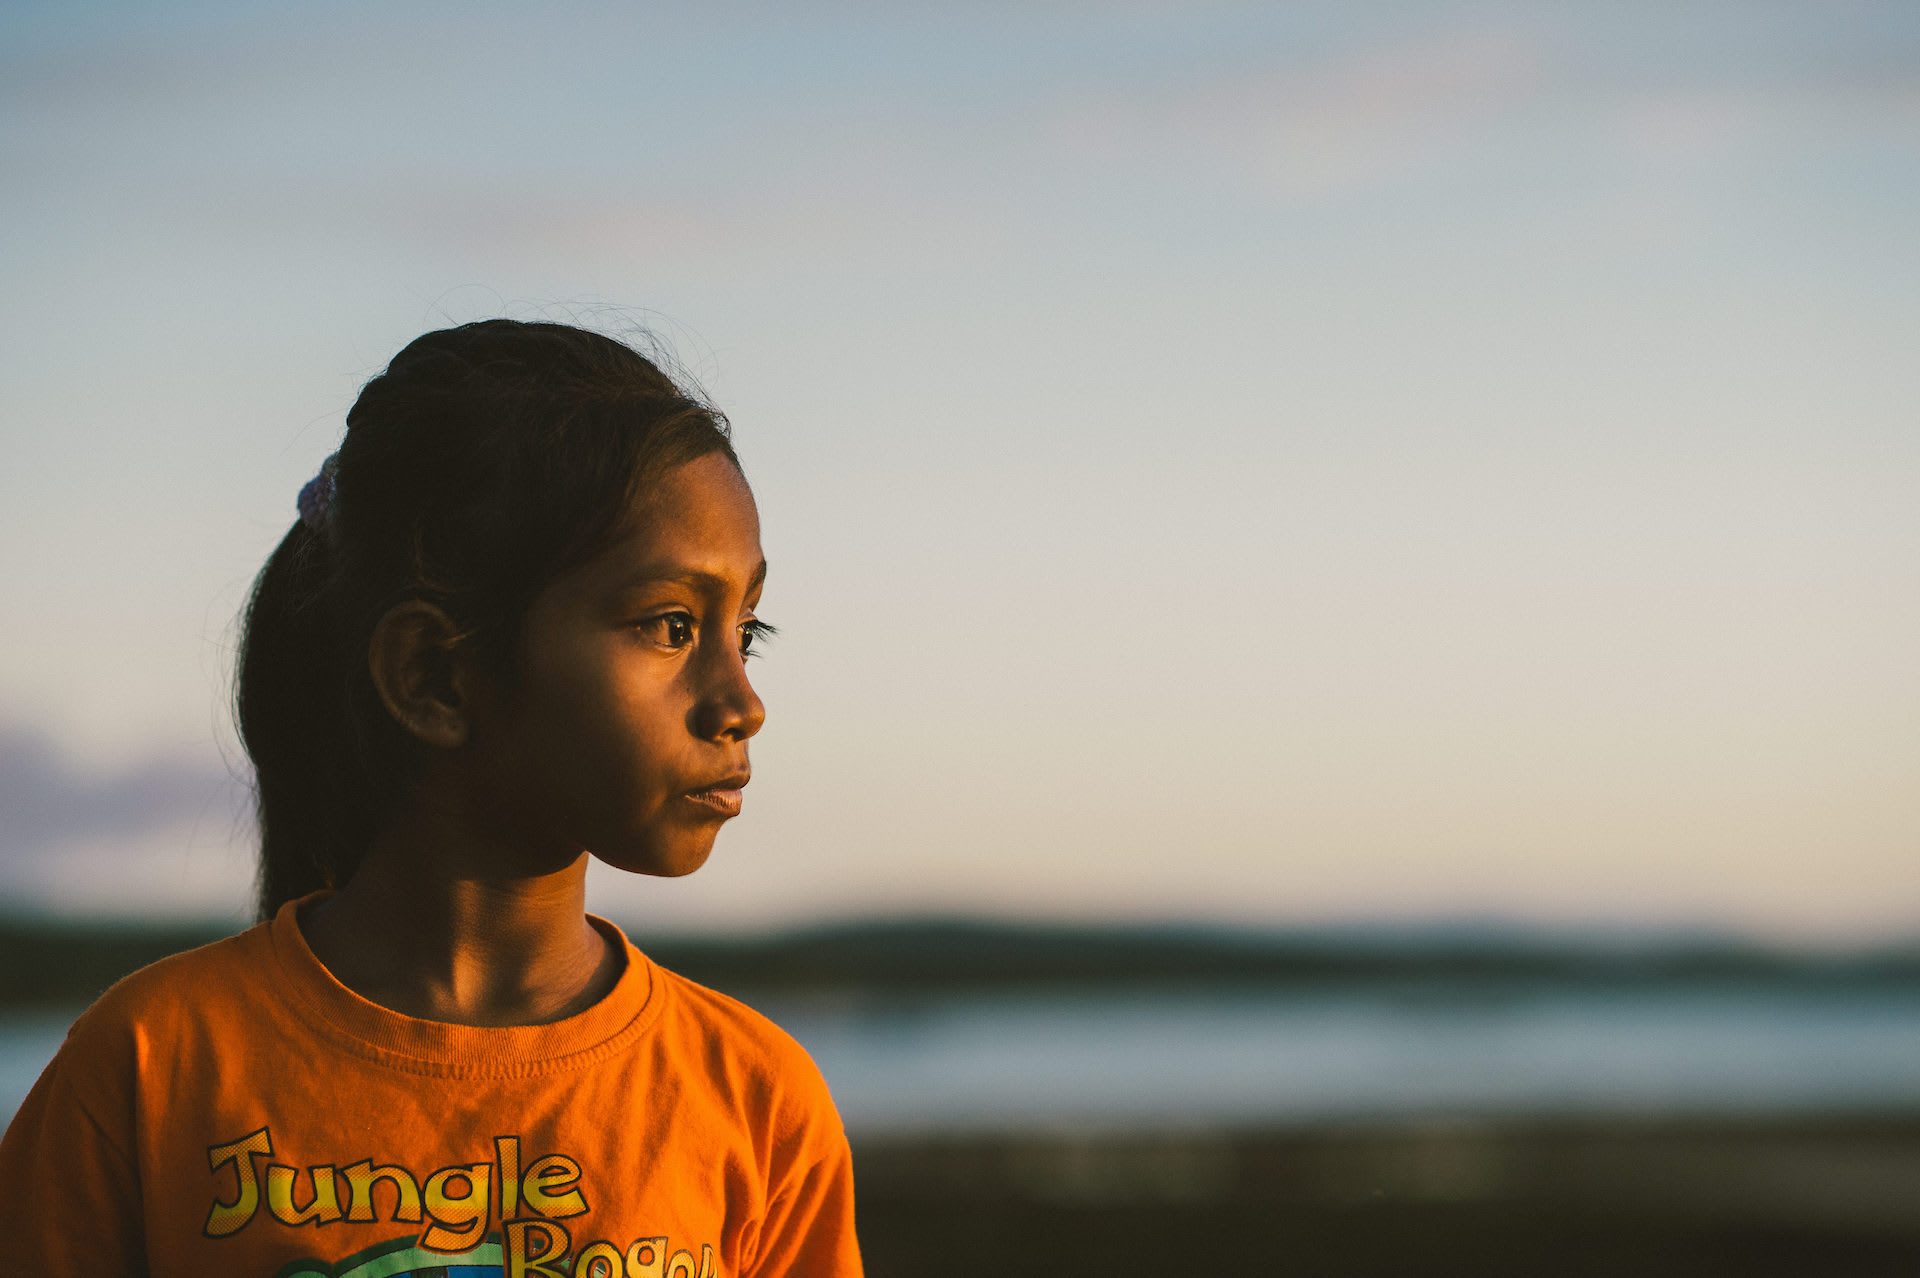 An Indonesian girl wearing an orange t-shirt and a pony tail looks at the sunset.